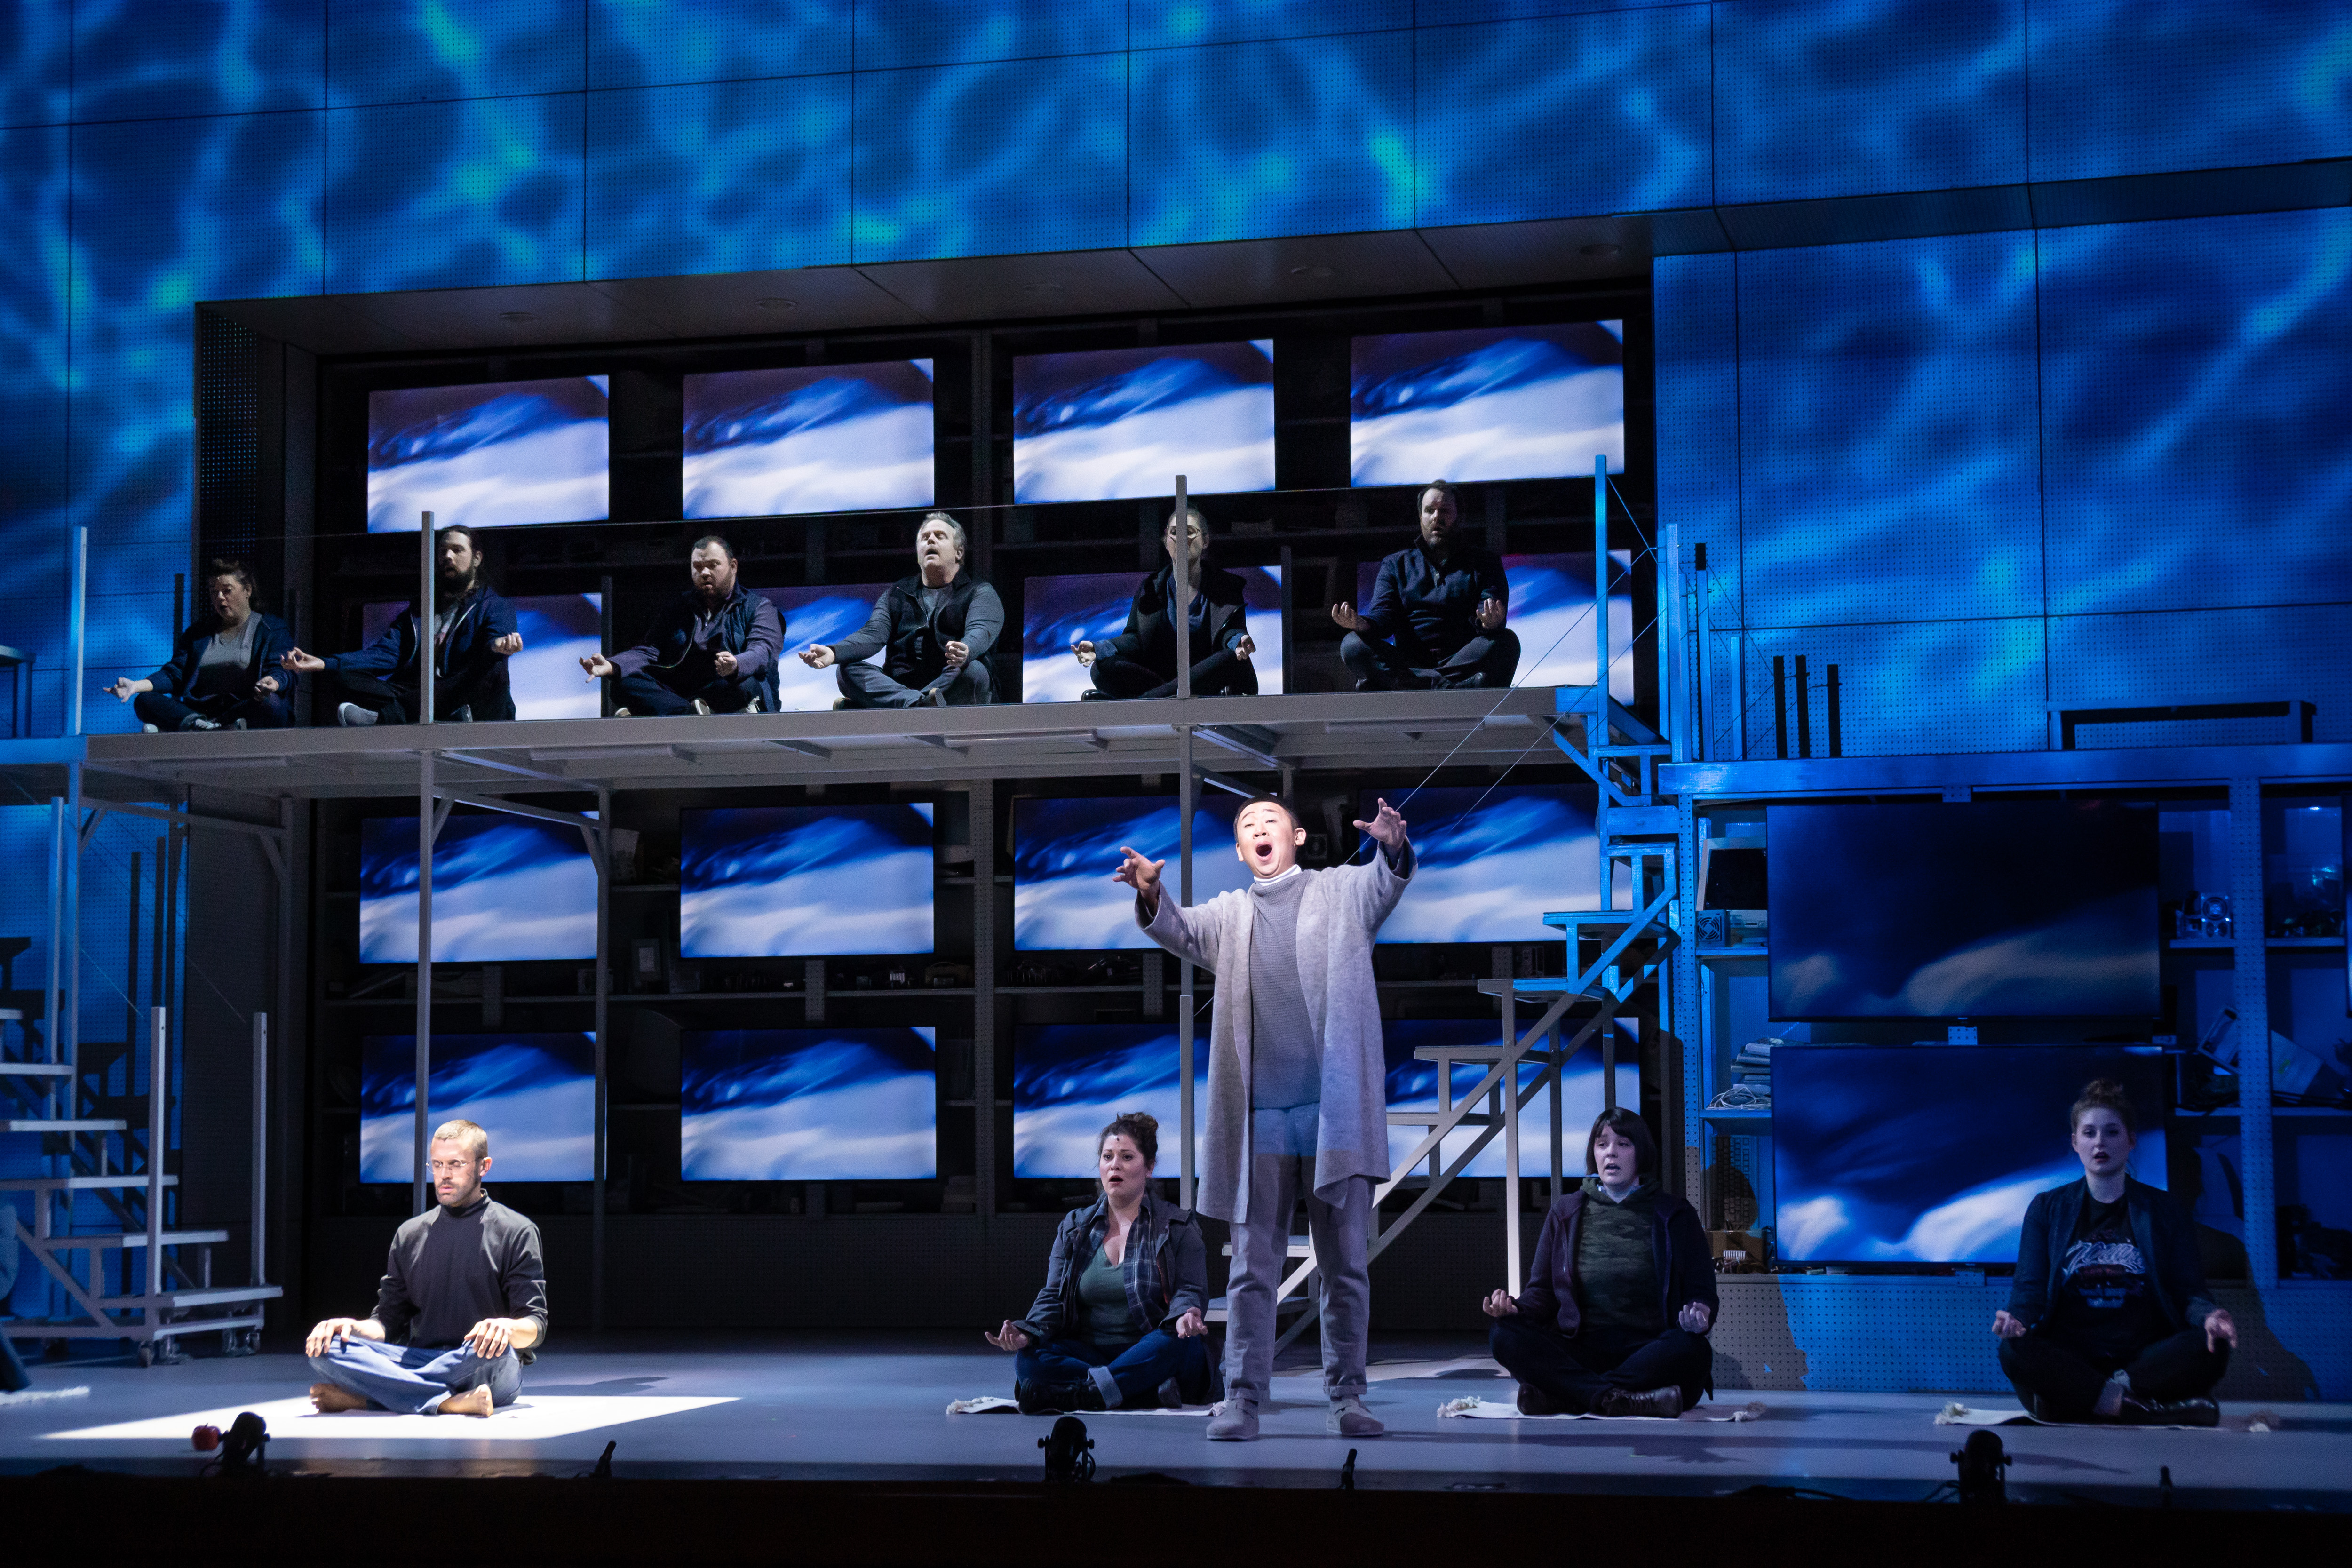 REVIEW: Lyric Opera’s Jobs opera is fascinating, frustrating, and fun